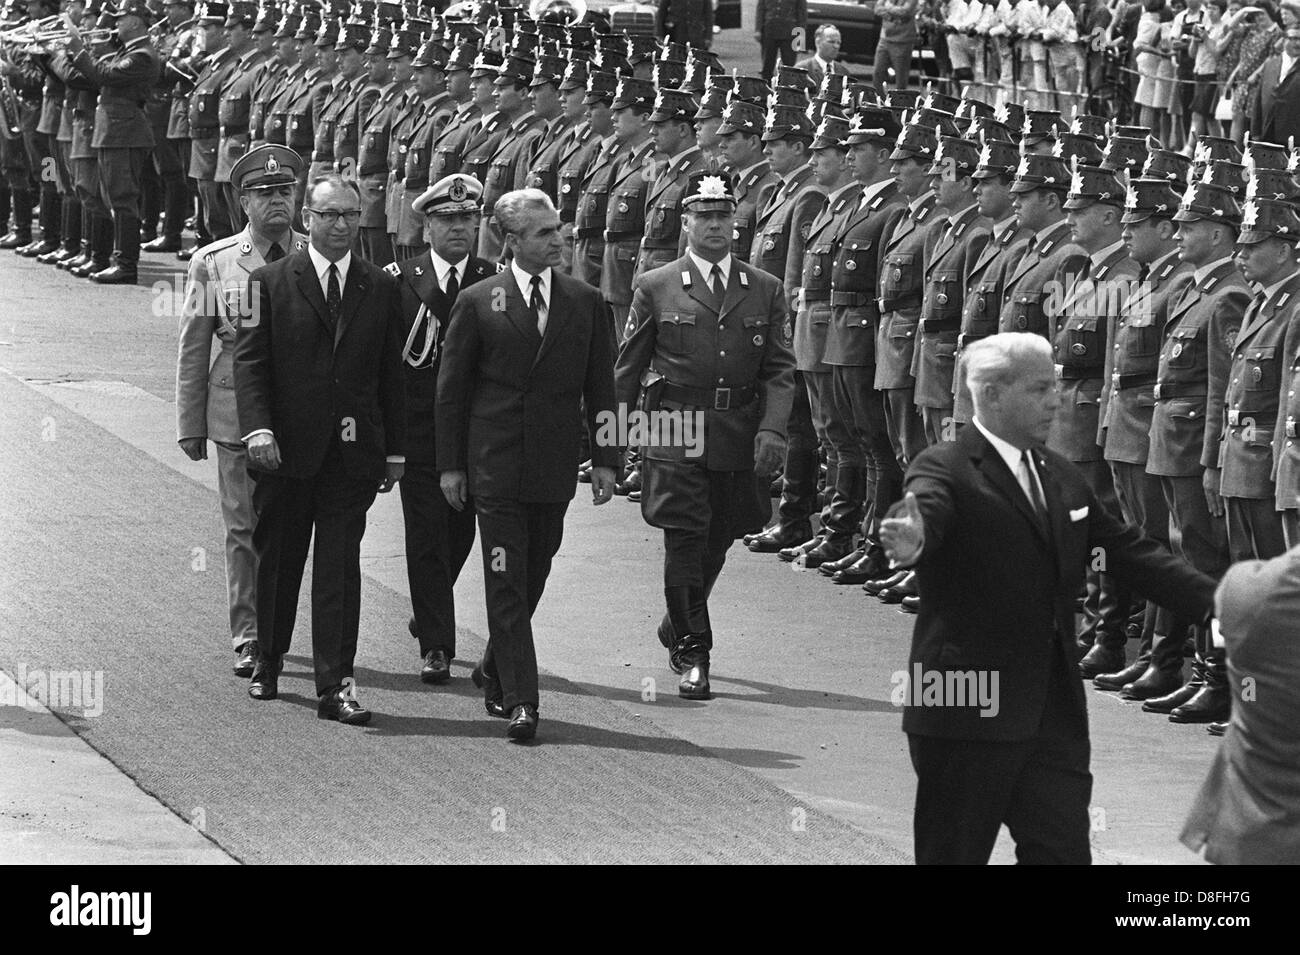 Iranian Shah Reza Mohammed Pahlavi (m) and governing mayor of Berlin Heinrich Albertz (l) walk past an honorary formation of the police of Berlin on the 2nd of June in 1967 in airport of Tempelhof in Berlin. The visit of the Shah caused massive protests, during which student Benno Ohnesorg lost his life. Stock Photo